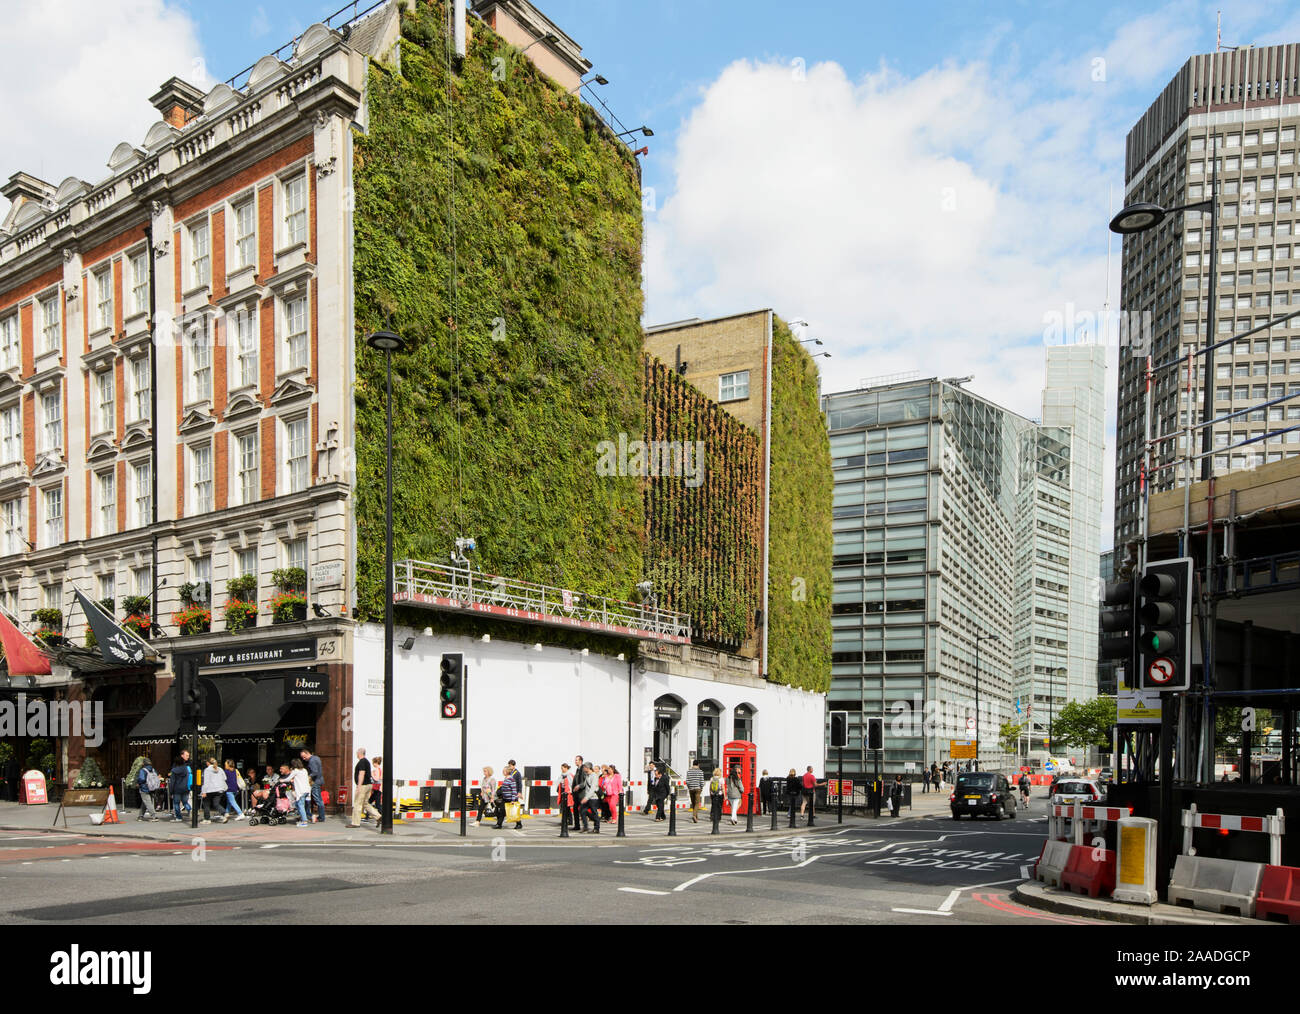 Green wall, Victoria, London UK. This wall captures rainfall and releases it slowly regulating temperature and decreasing urban run off 2014 Stock Photo